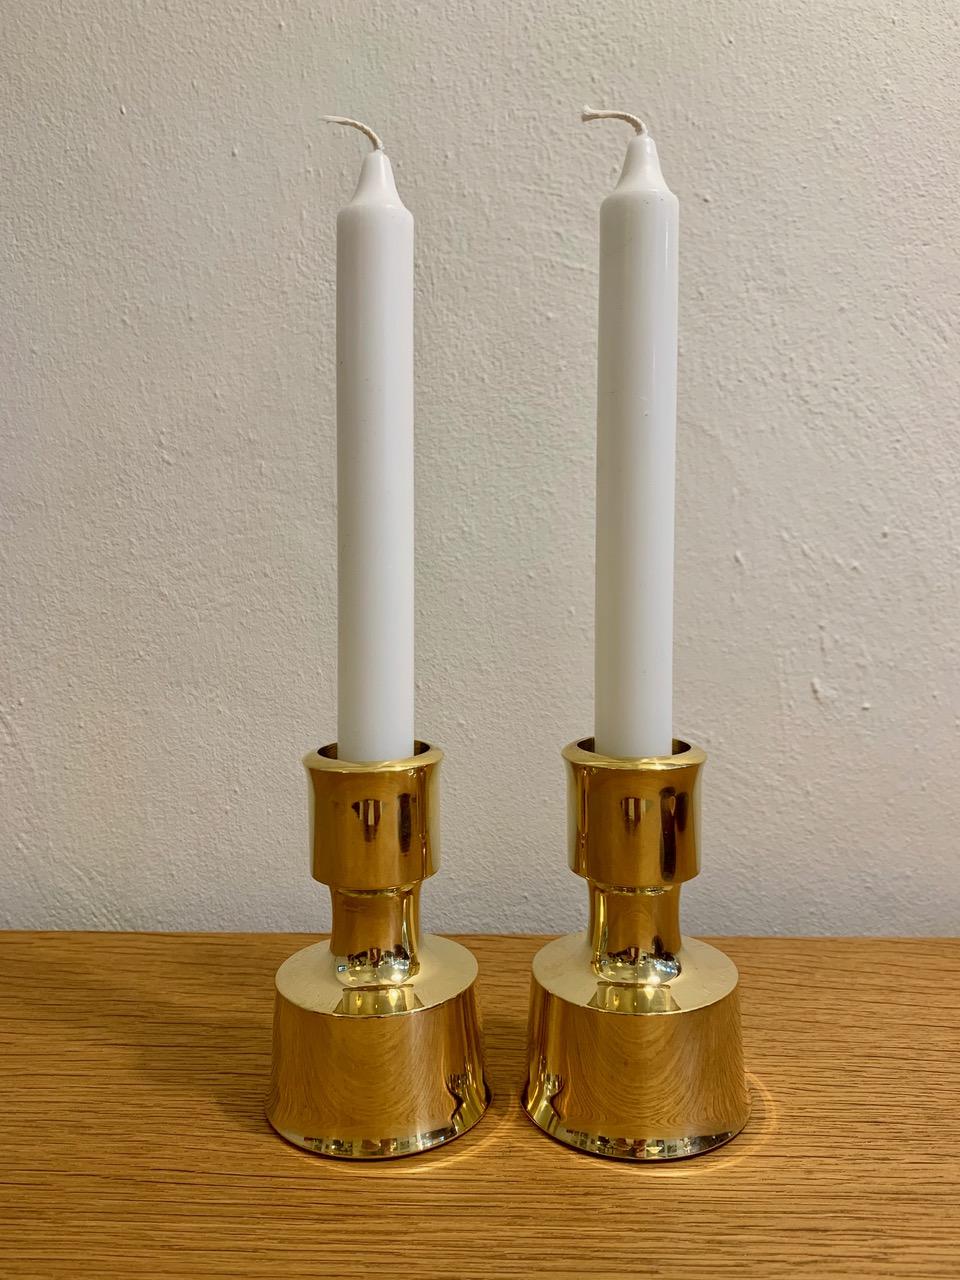 Pair of Solid Brass Candle Holders by Jens H. Quistgaard for Dansk Designs 1963 3